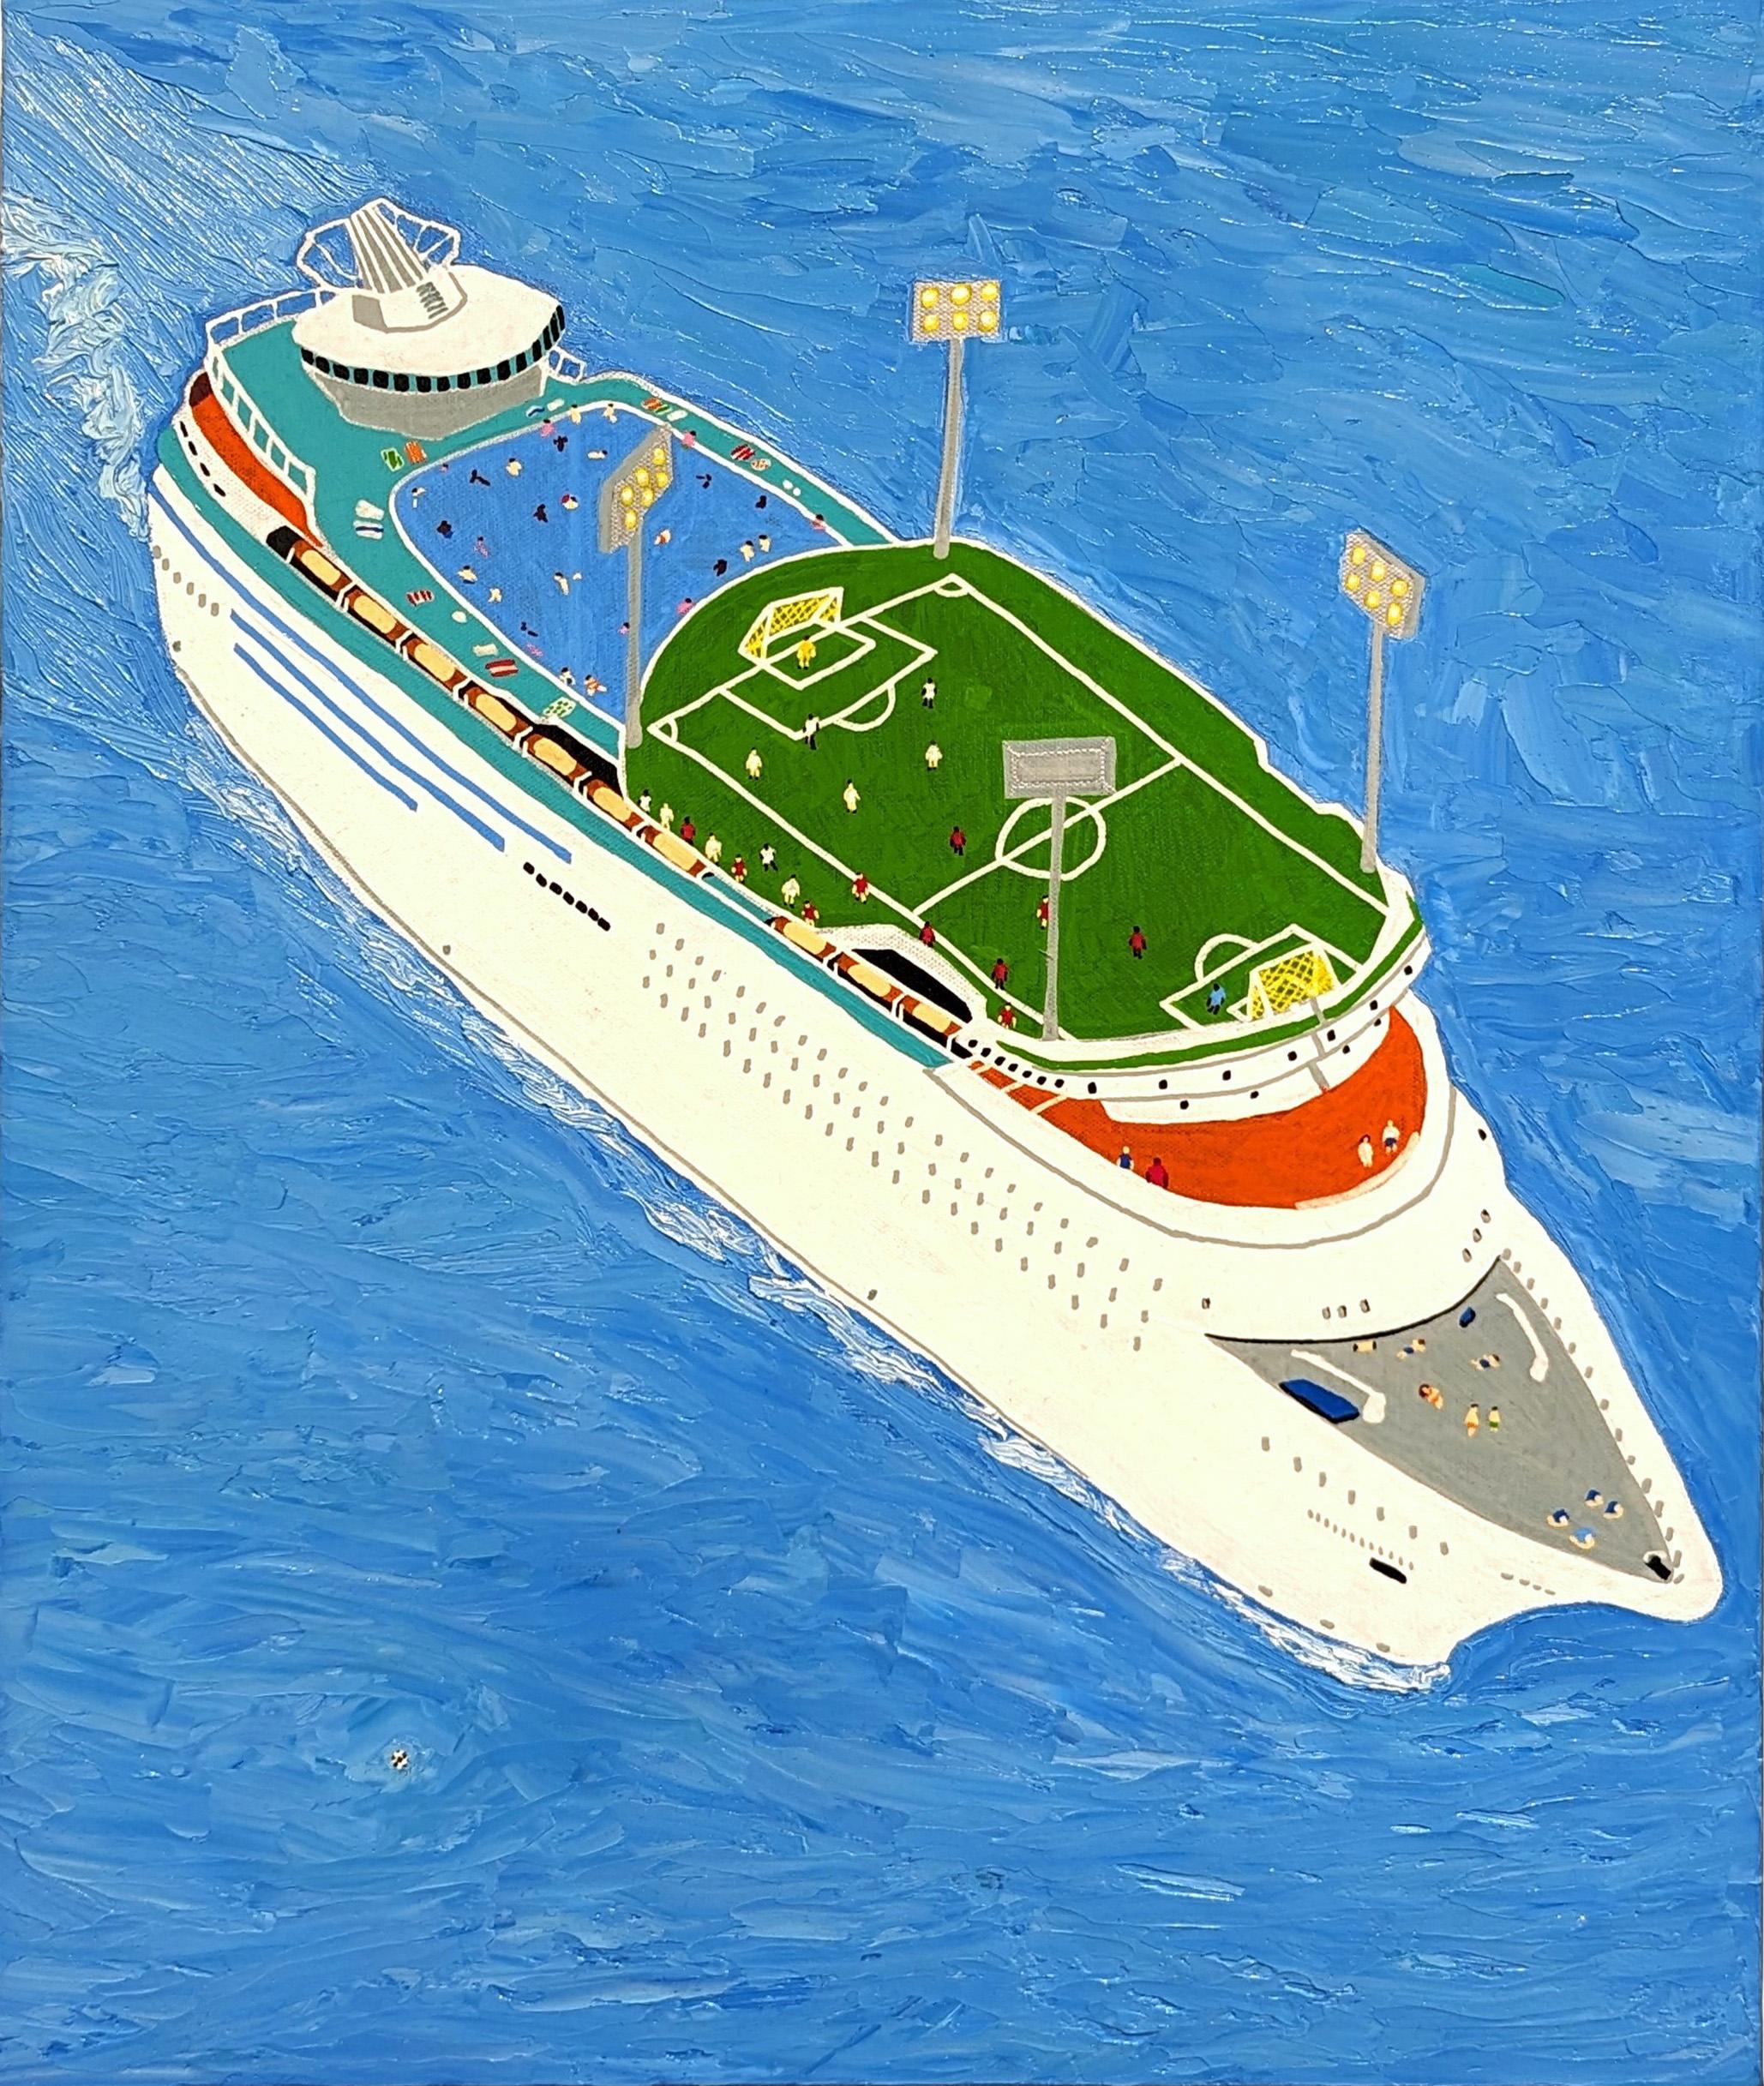 “I guess that's the game” Colorful Contemporary Humorous Ship Landscape Painting